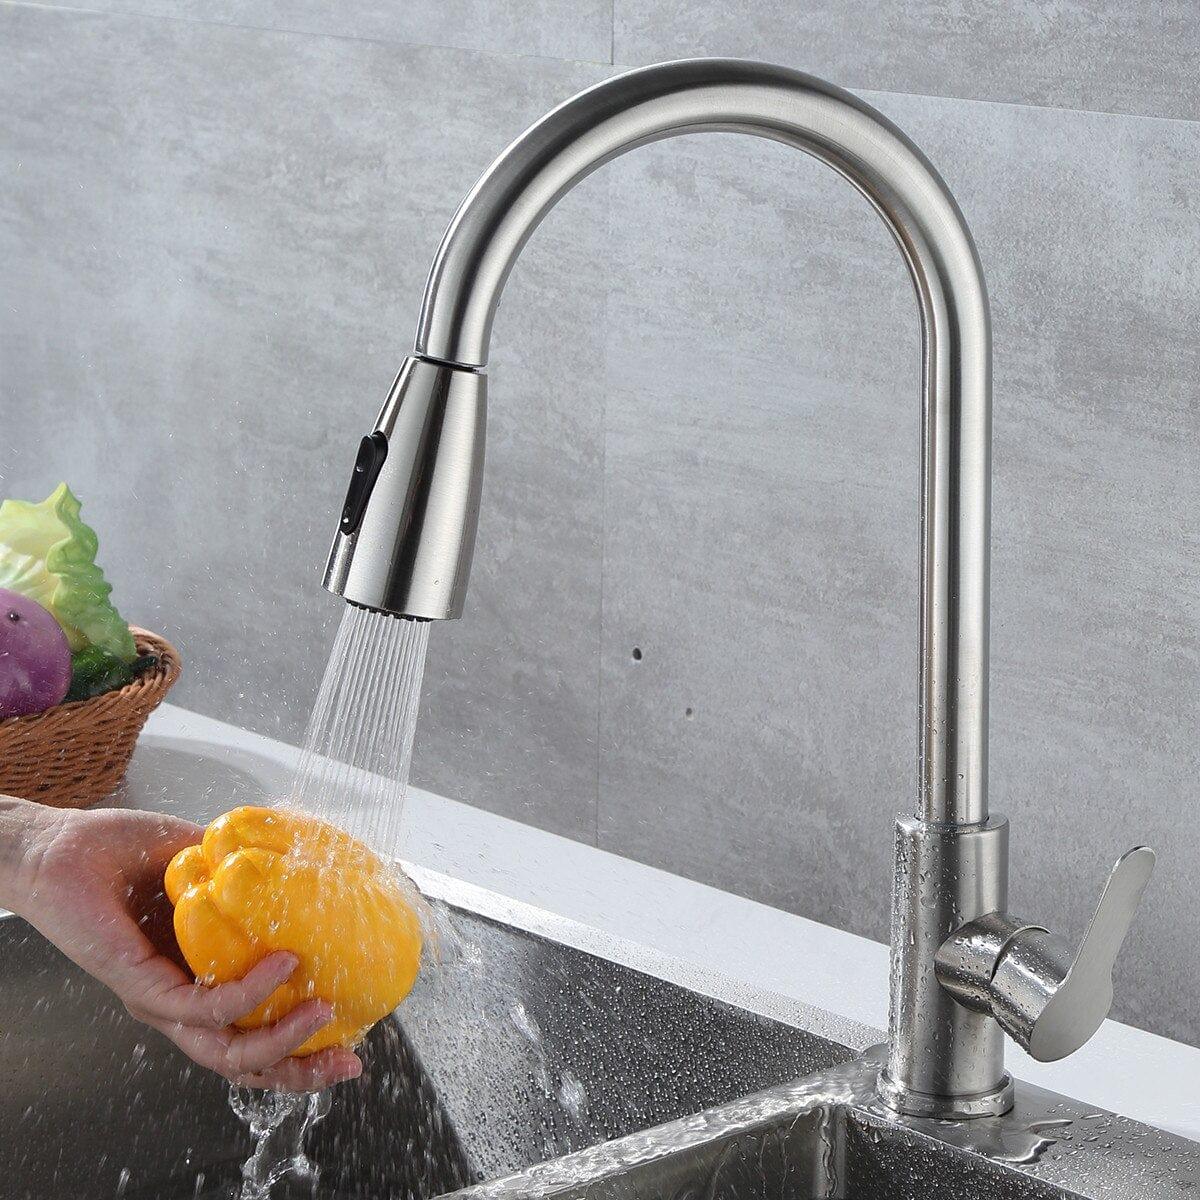 Shop 0 Kitchen Faucet Stainless Steel Faucets Hot Cold Water Mixer Tap 2 Function Stream Sprayer Single Handle Pull Out Kitchen Taps Mademoiselle Home Decor